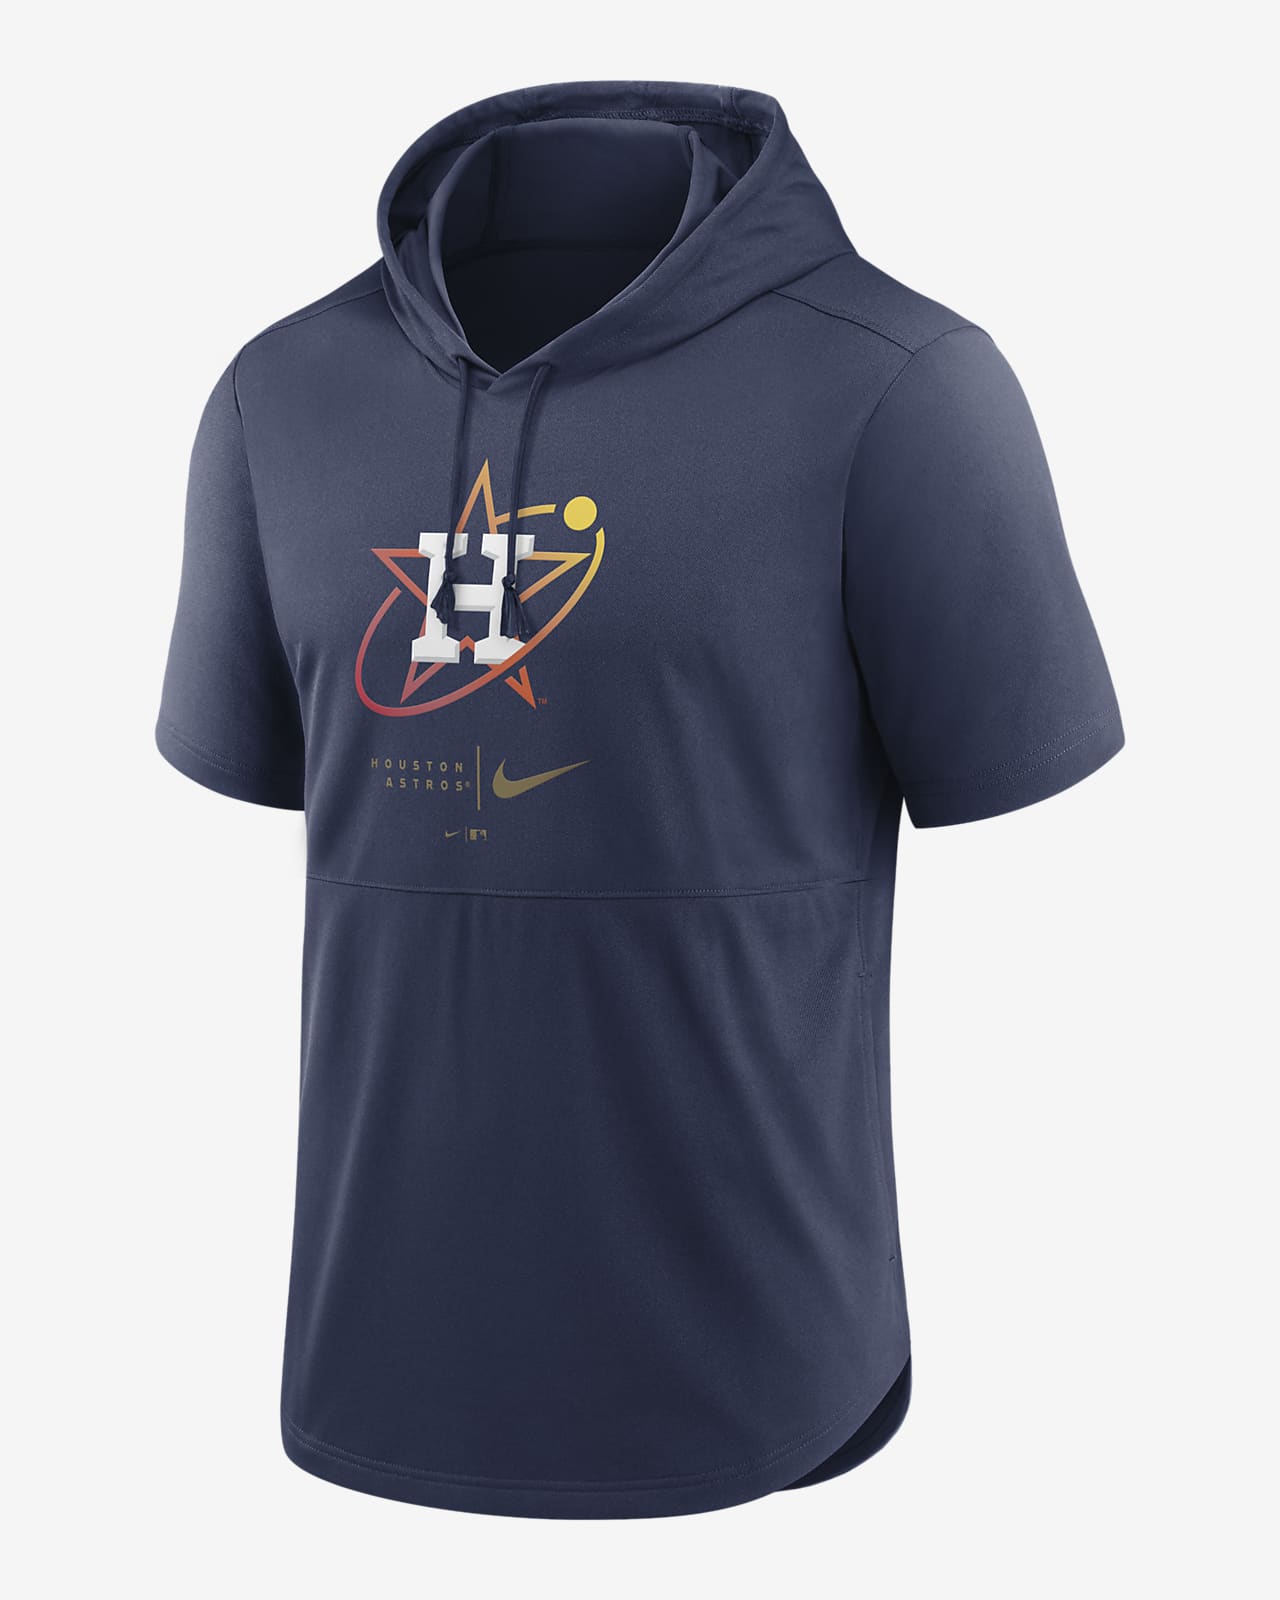 Nike Dri-FIT City Connect (MLB Houston Astros) Men's Hooded Short-Sleeve Top